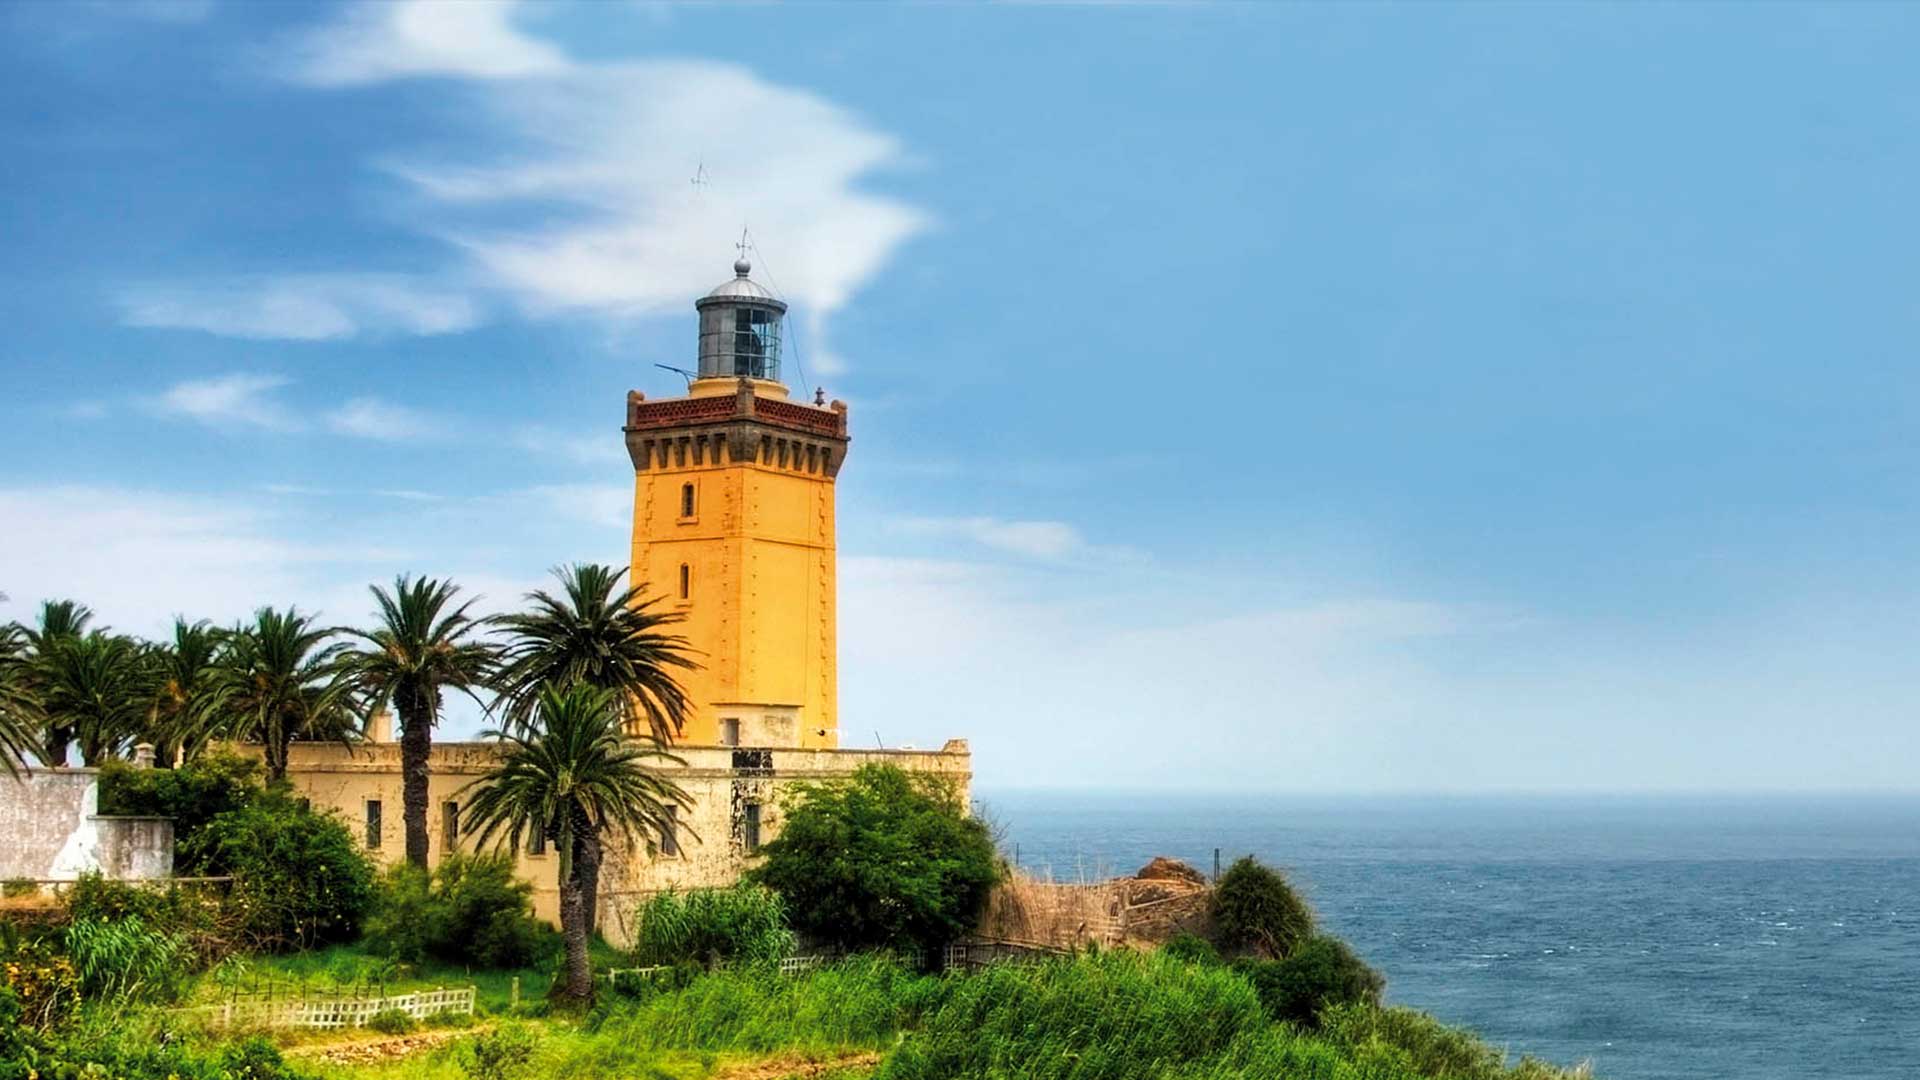 Tangier tour. Morocco imperial cities tours starts from Tangier